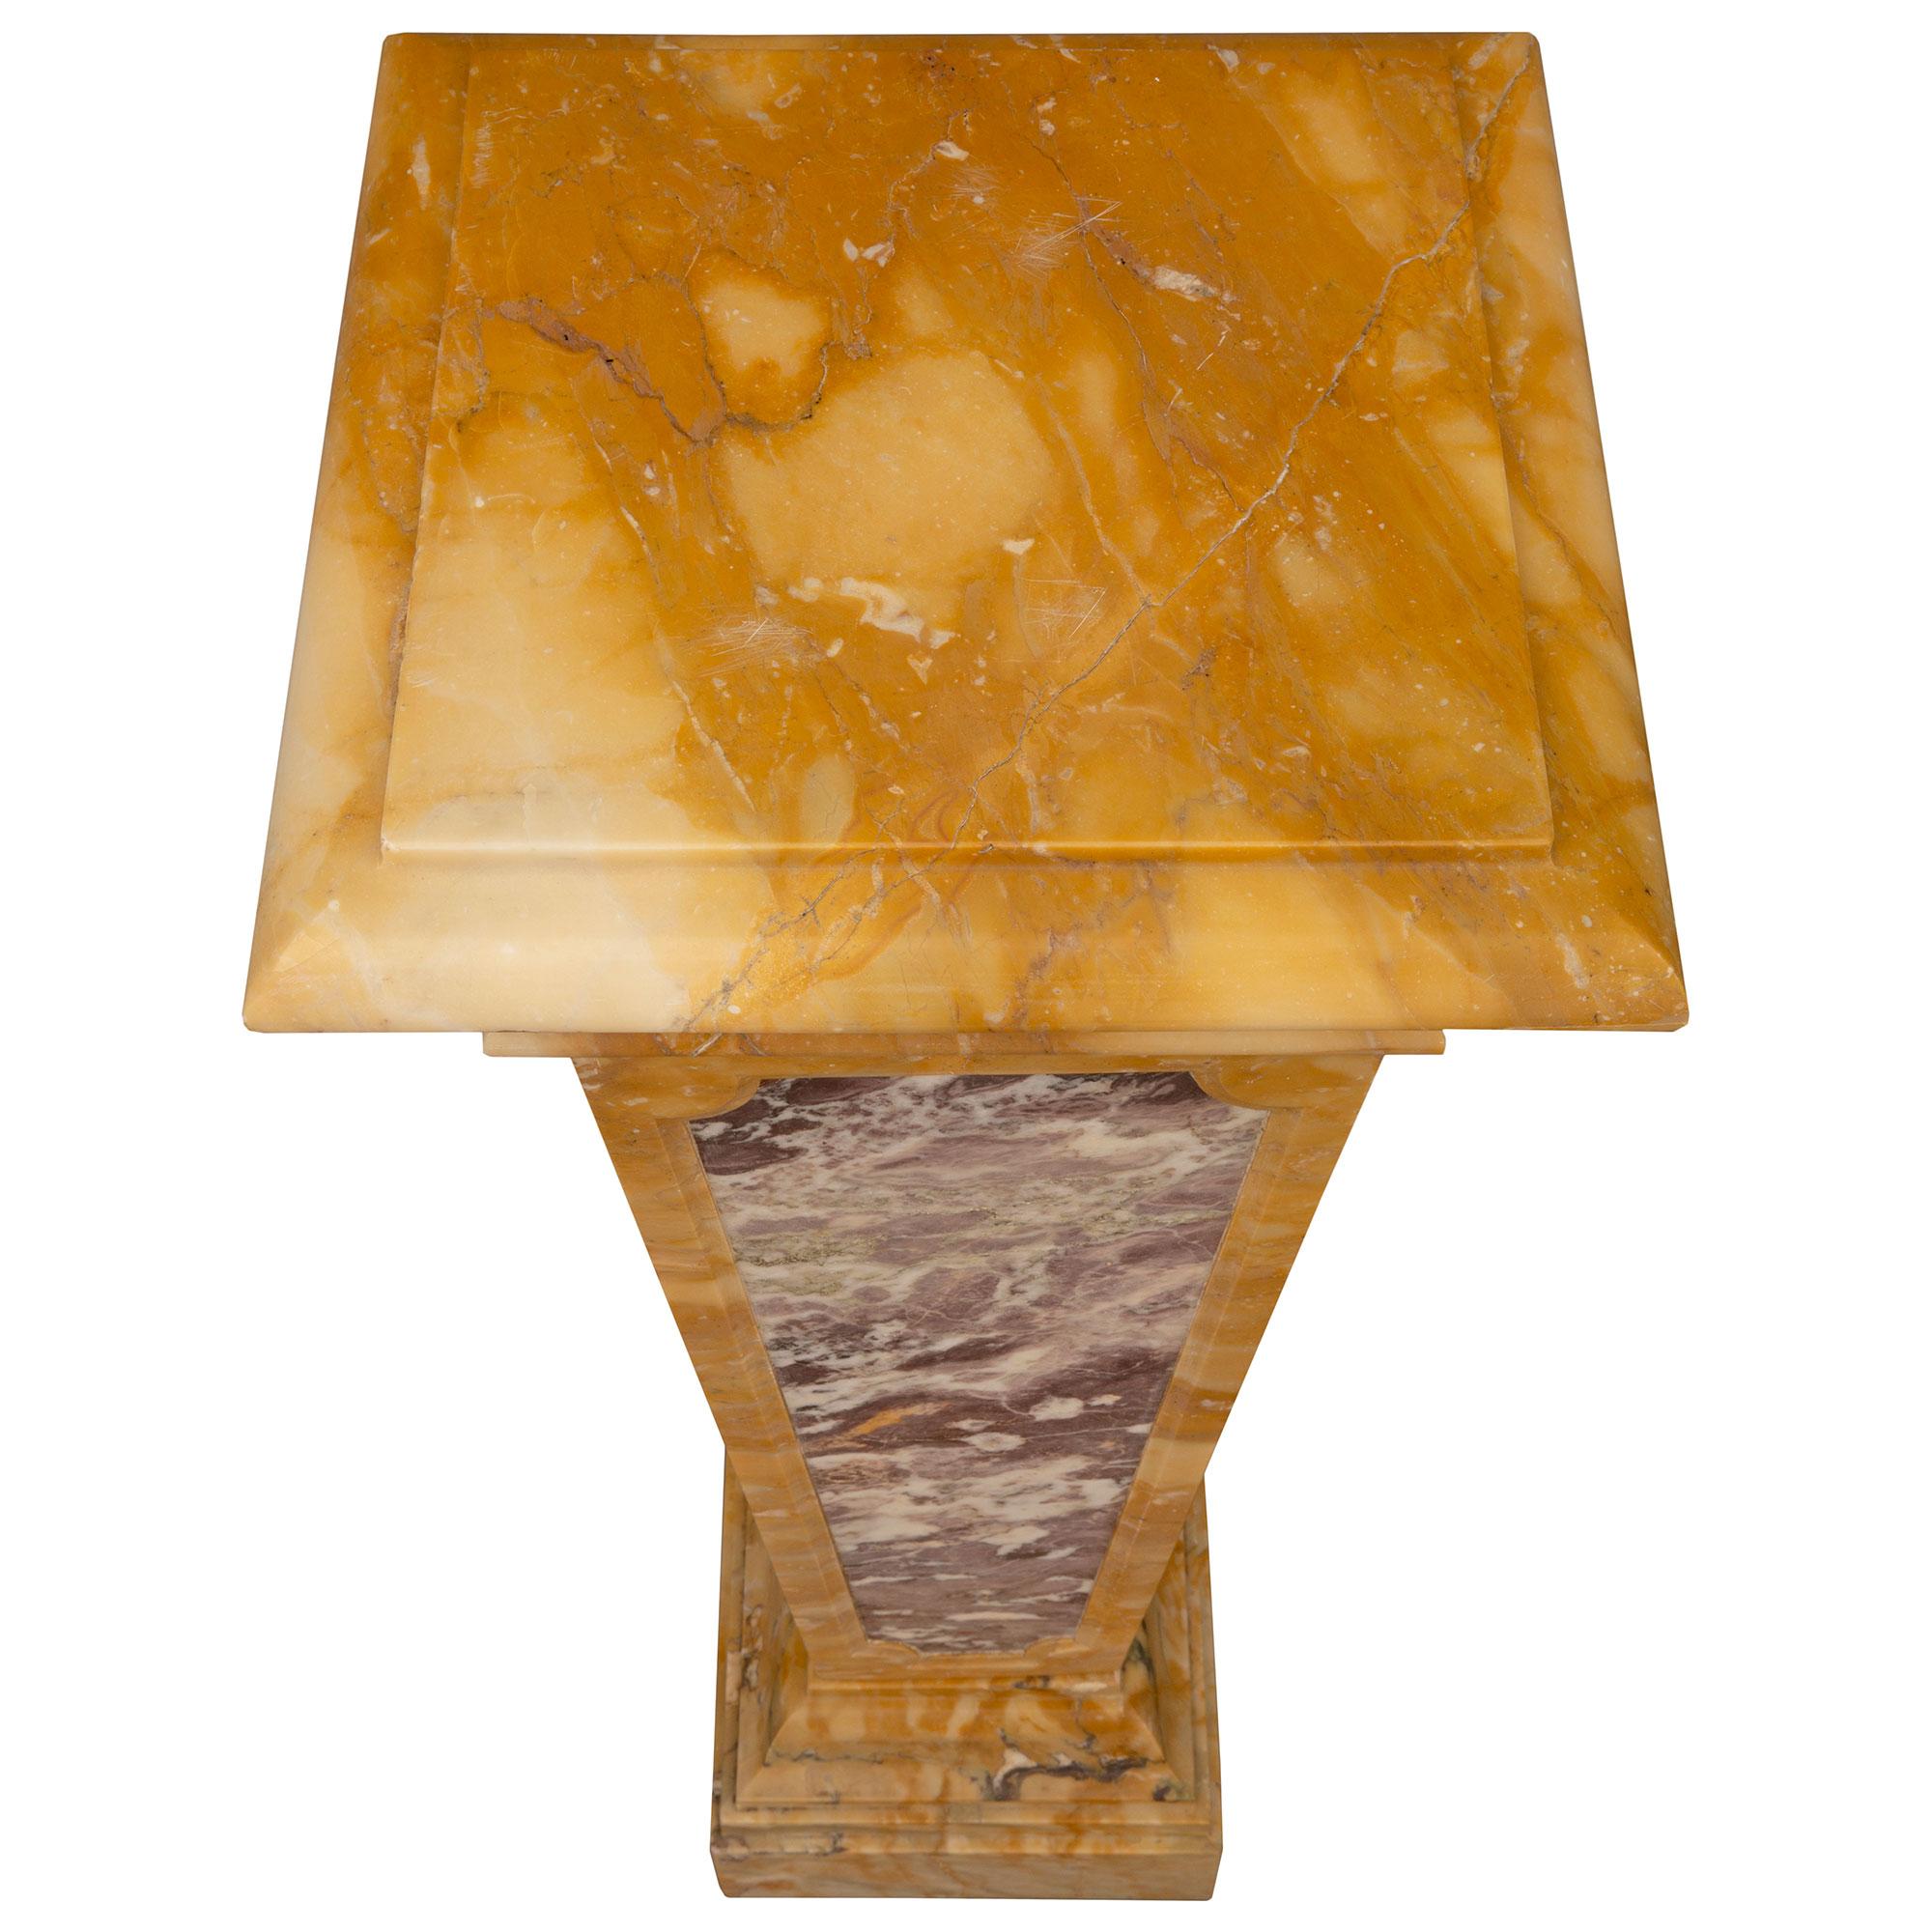 A most impressive Italian 19th century Neo-Classical st. Brèche Violette and Sienna marble pedestal column. The pedestal is raised by a fine square base with an elegant and most decorative stepped design. The square tapered central support displays